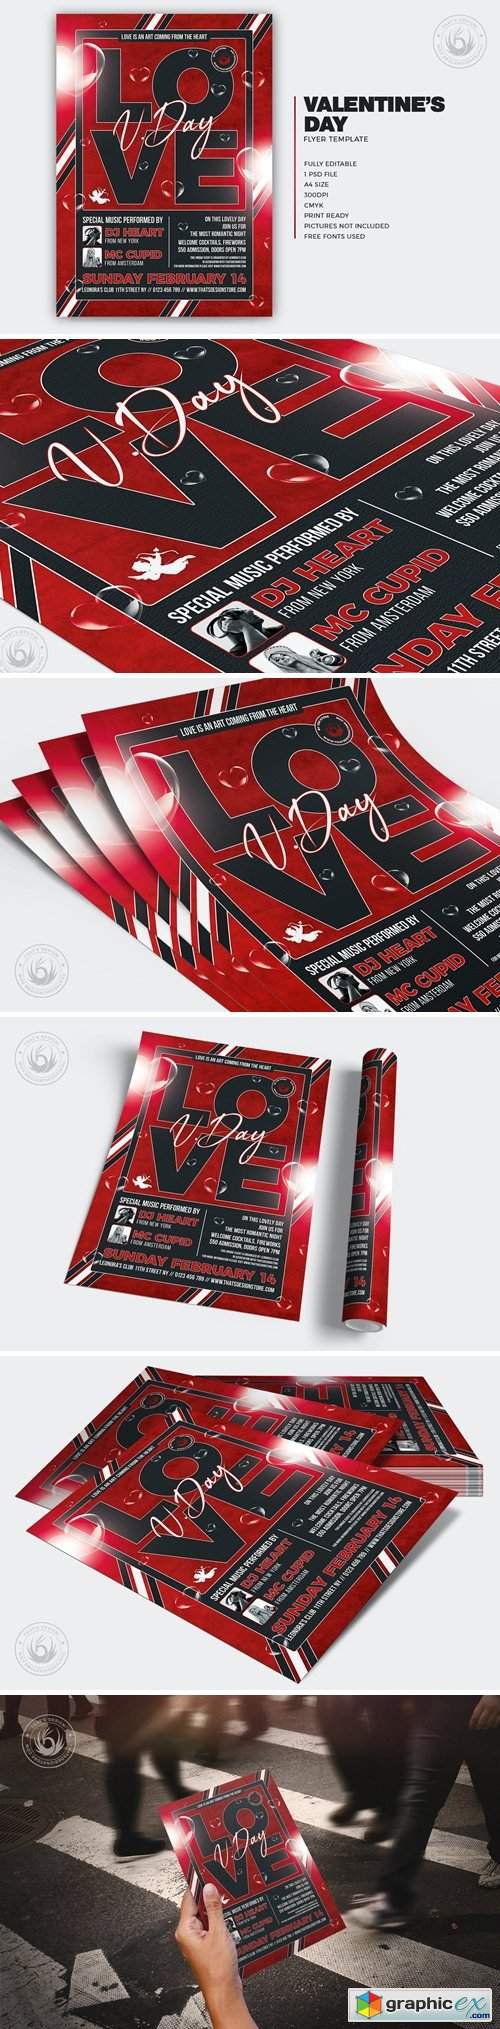 Download Valentines Day Flyer Template V25 Free Download Vector Stock Image Photoshop Icon